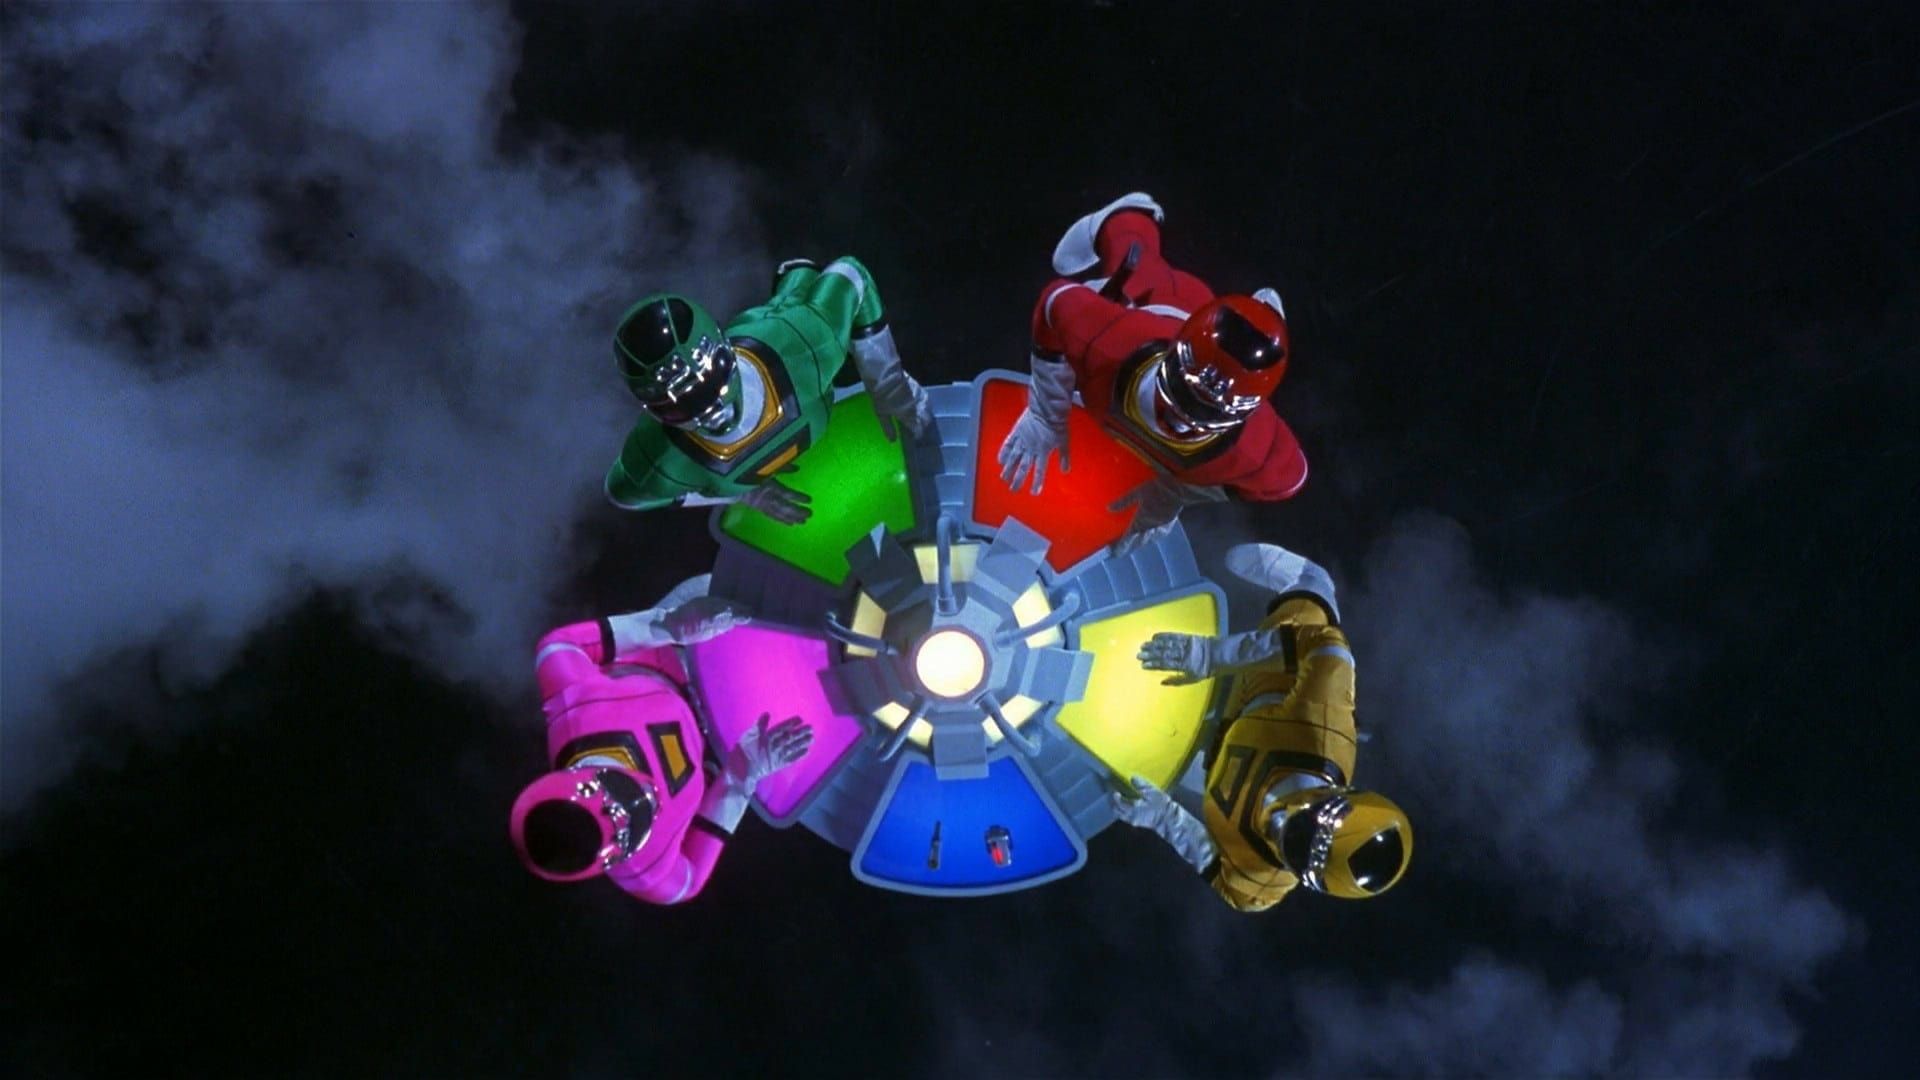 Turbo: A Power Rangers Movie background